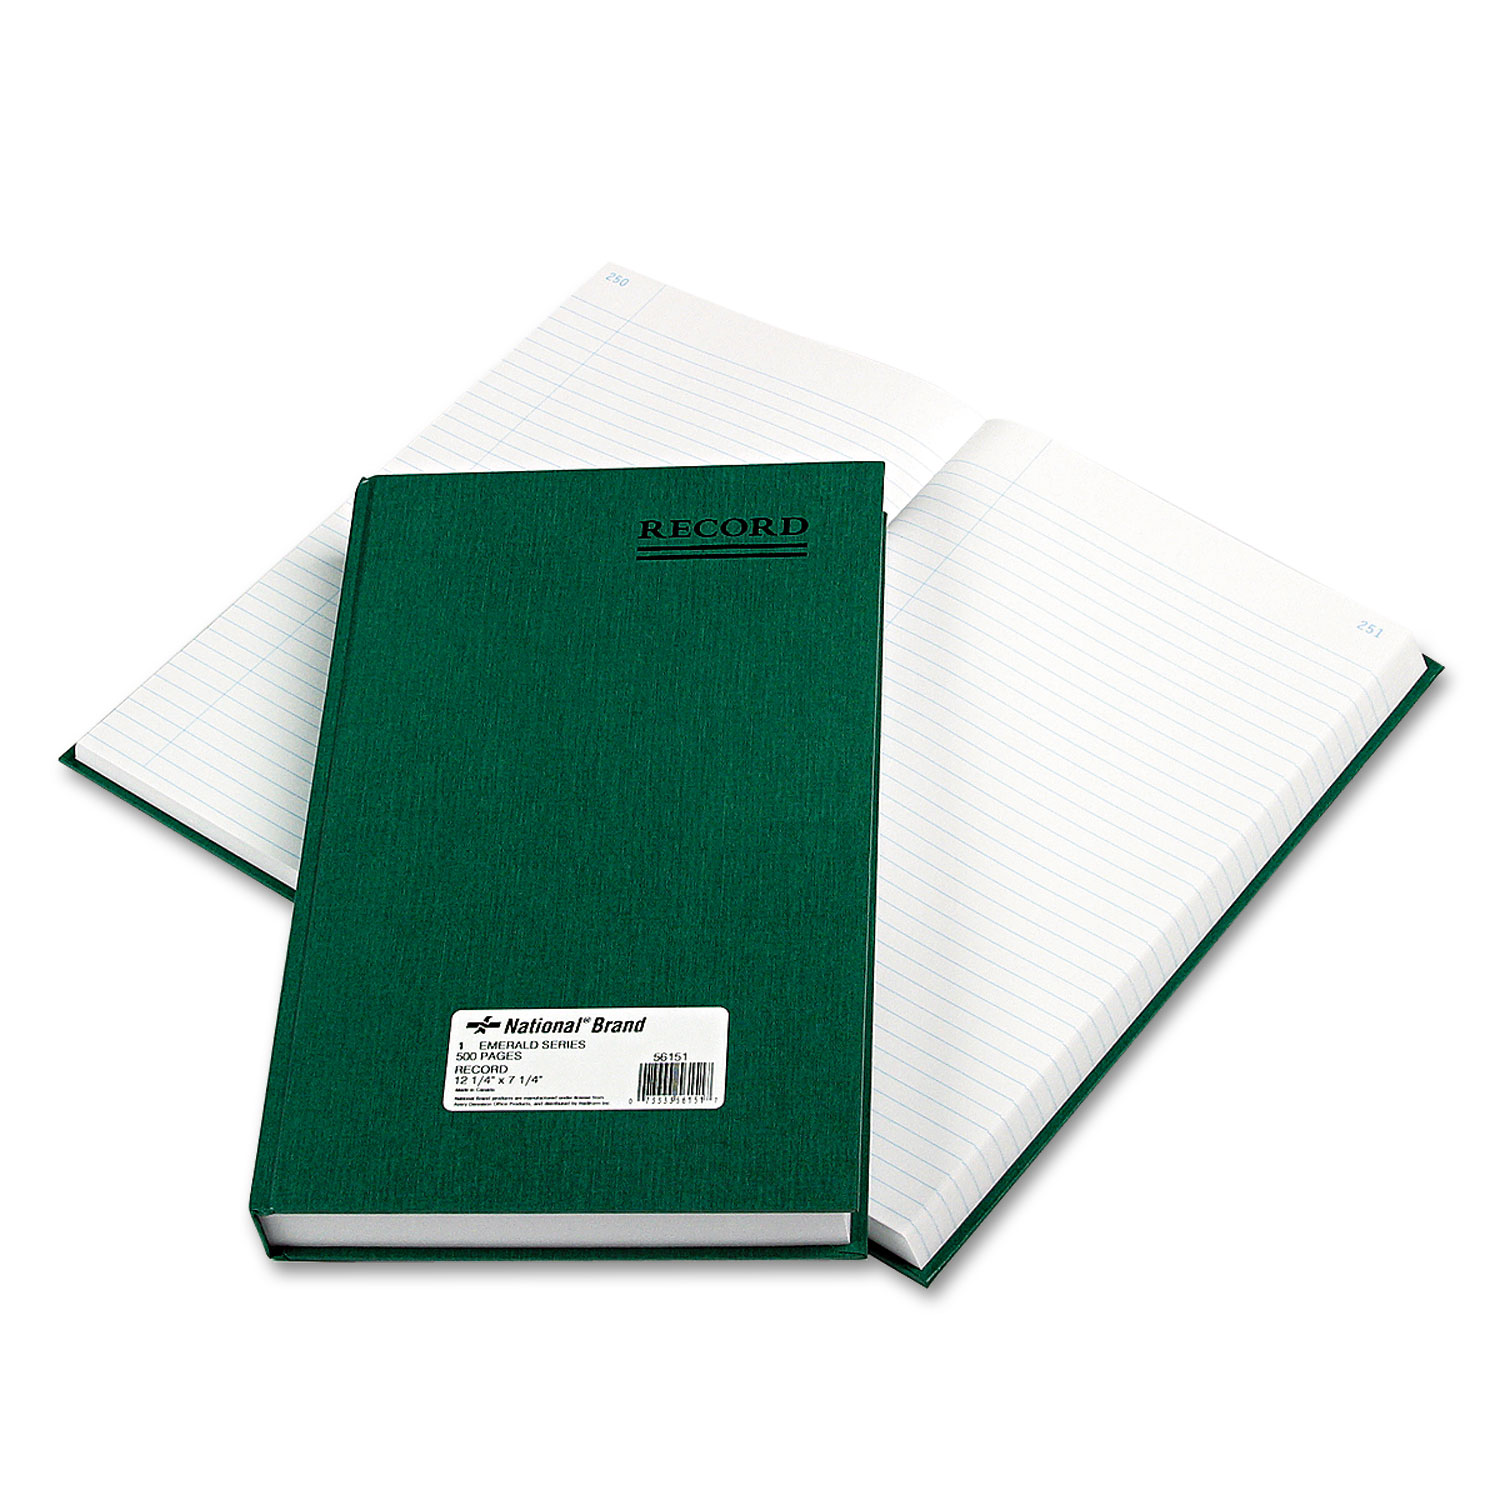  National 56151 Emerald Series Account Book, Green Cover, 500 Pages, 12 1/4 x 7 1/4 (RED56151) 